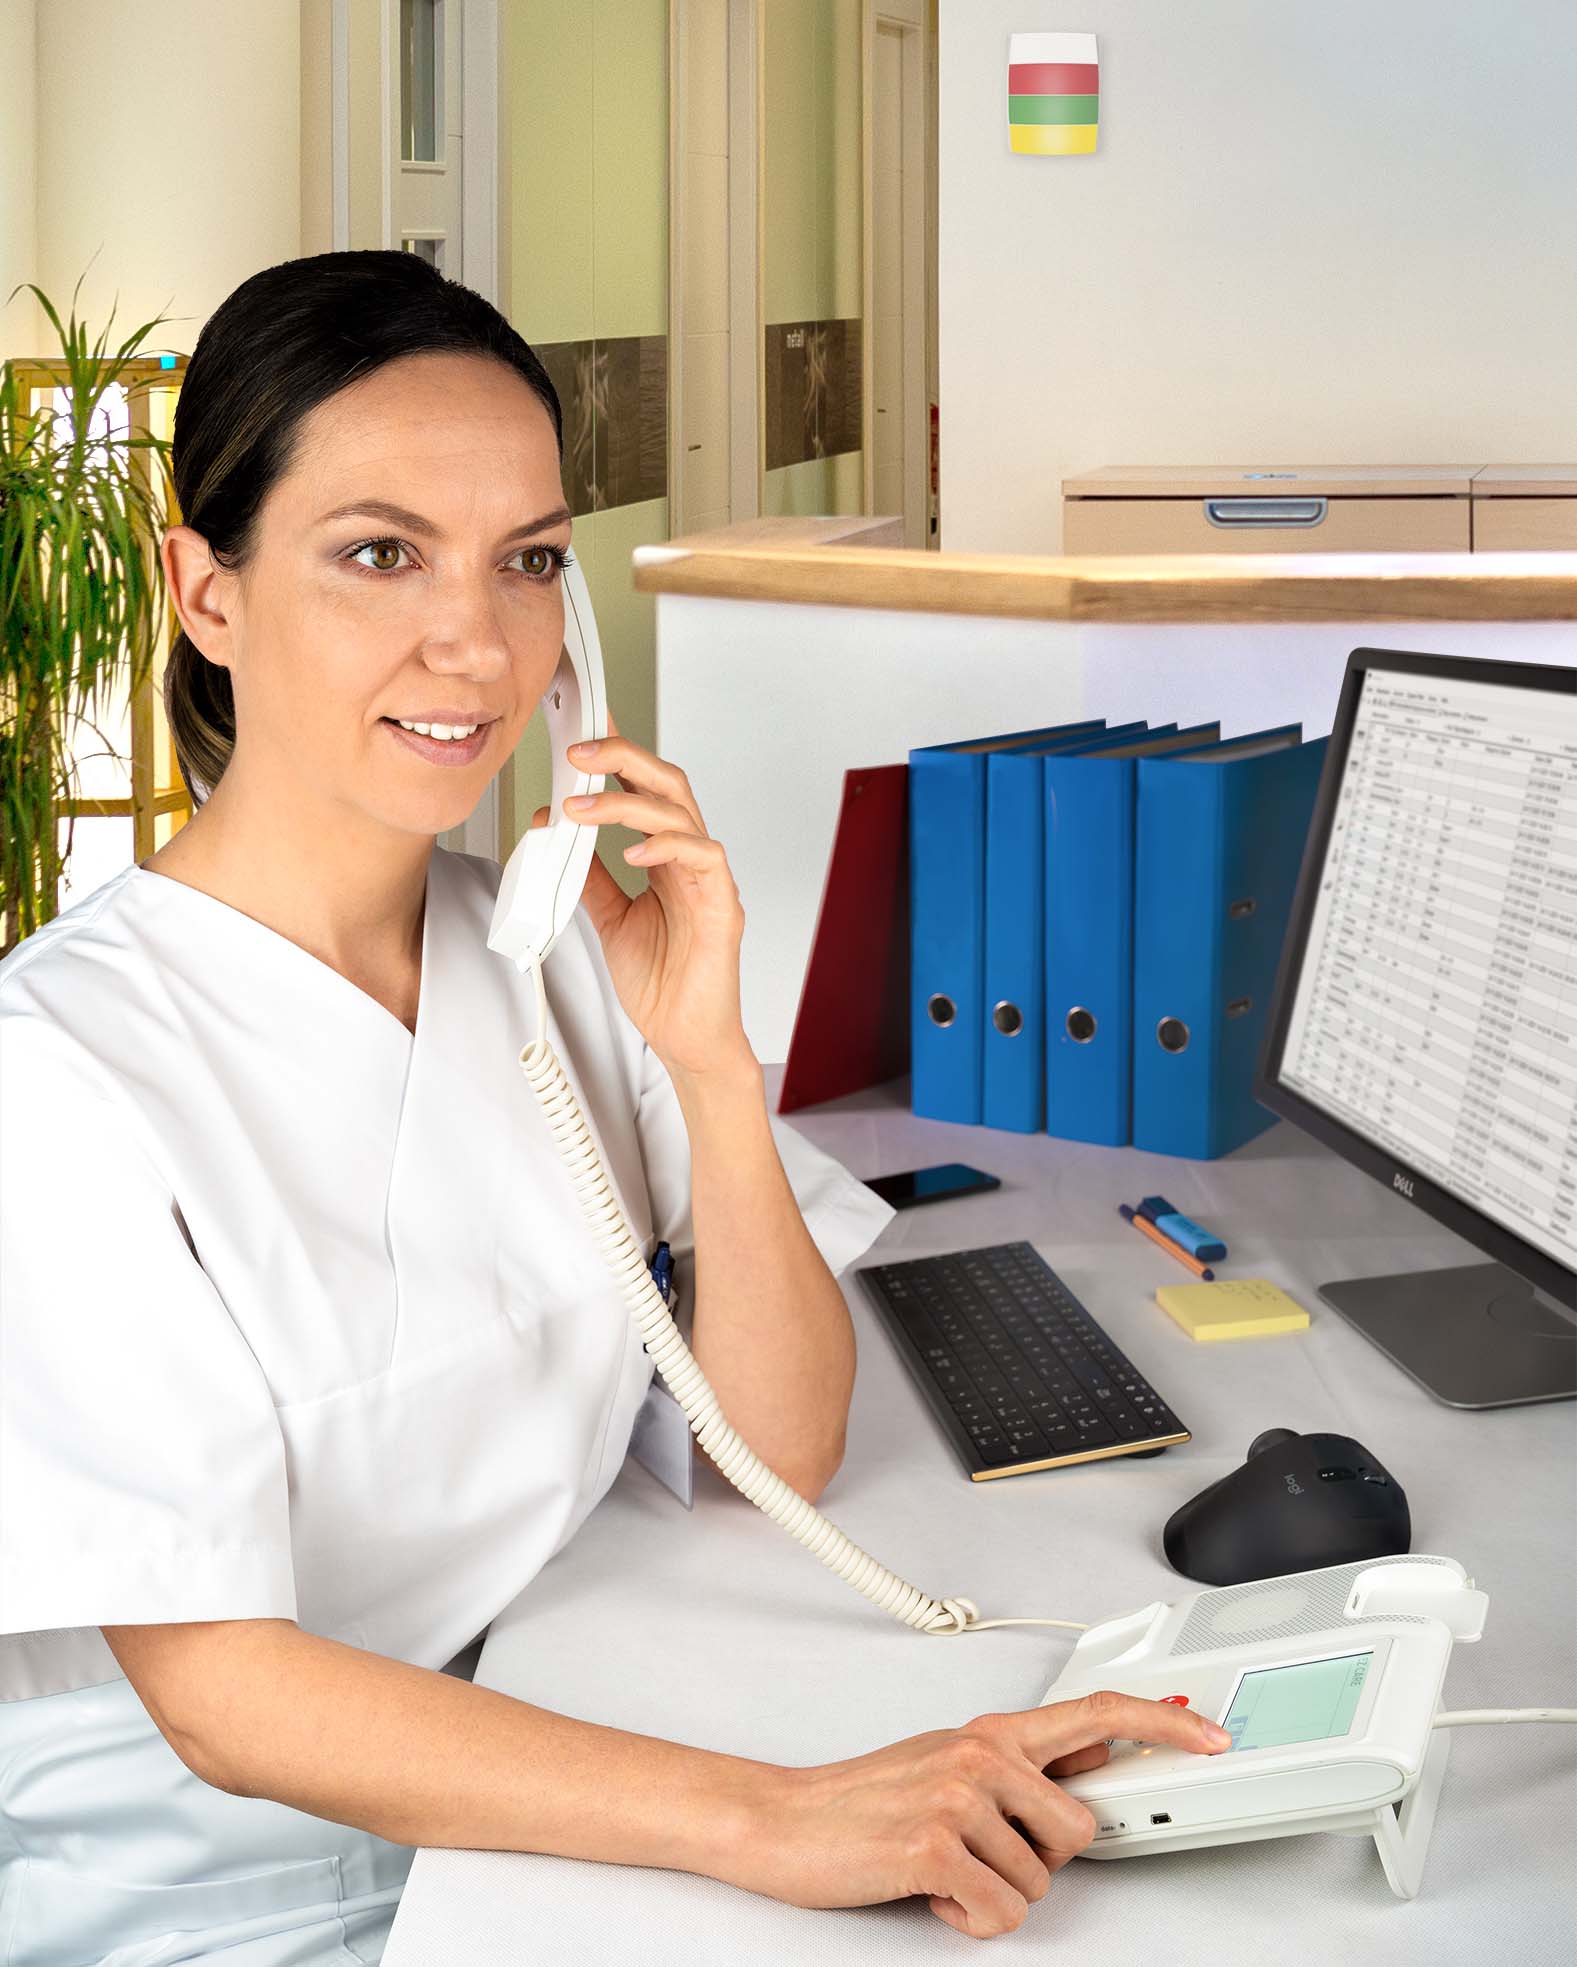 Call systems with speech relieve the nursing staff